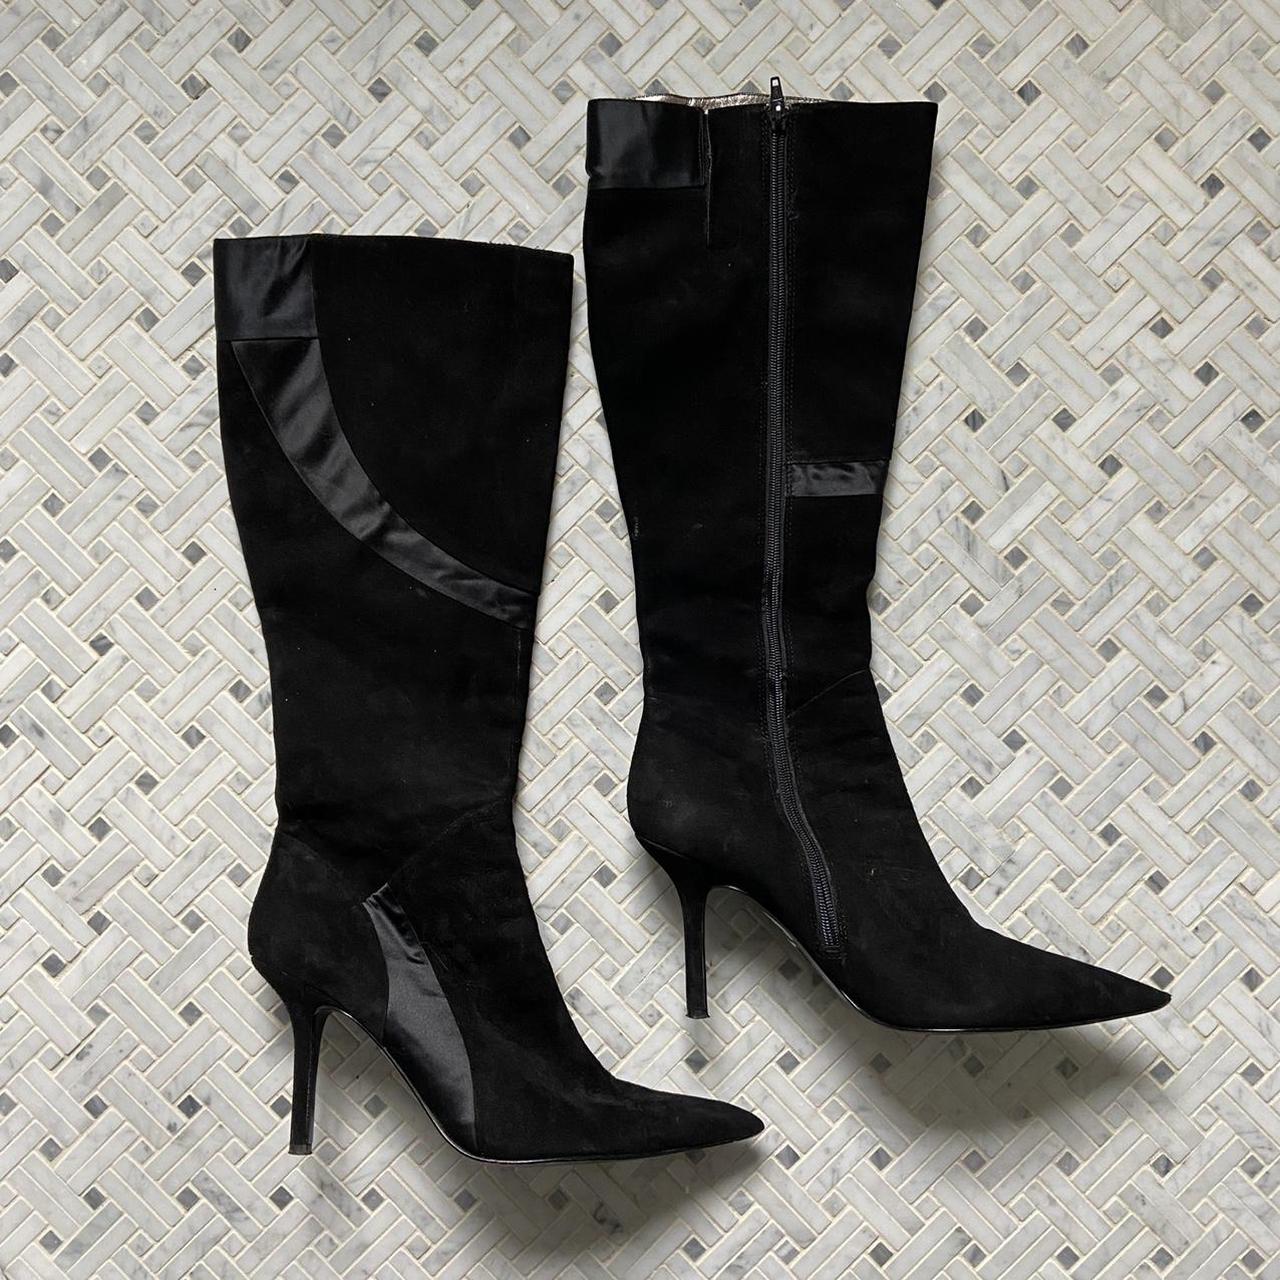 Product Image 1 - Vintage knee high boots with